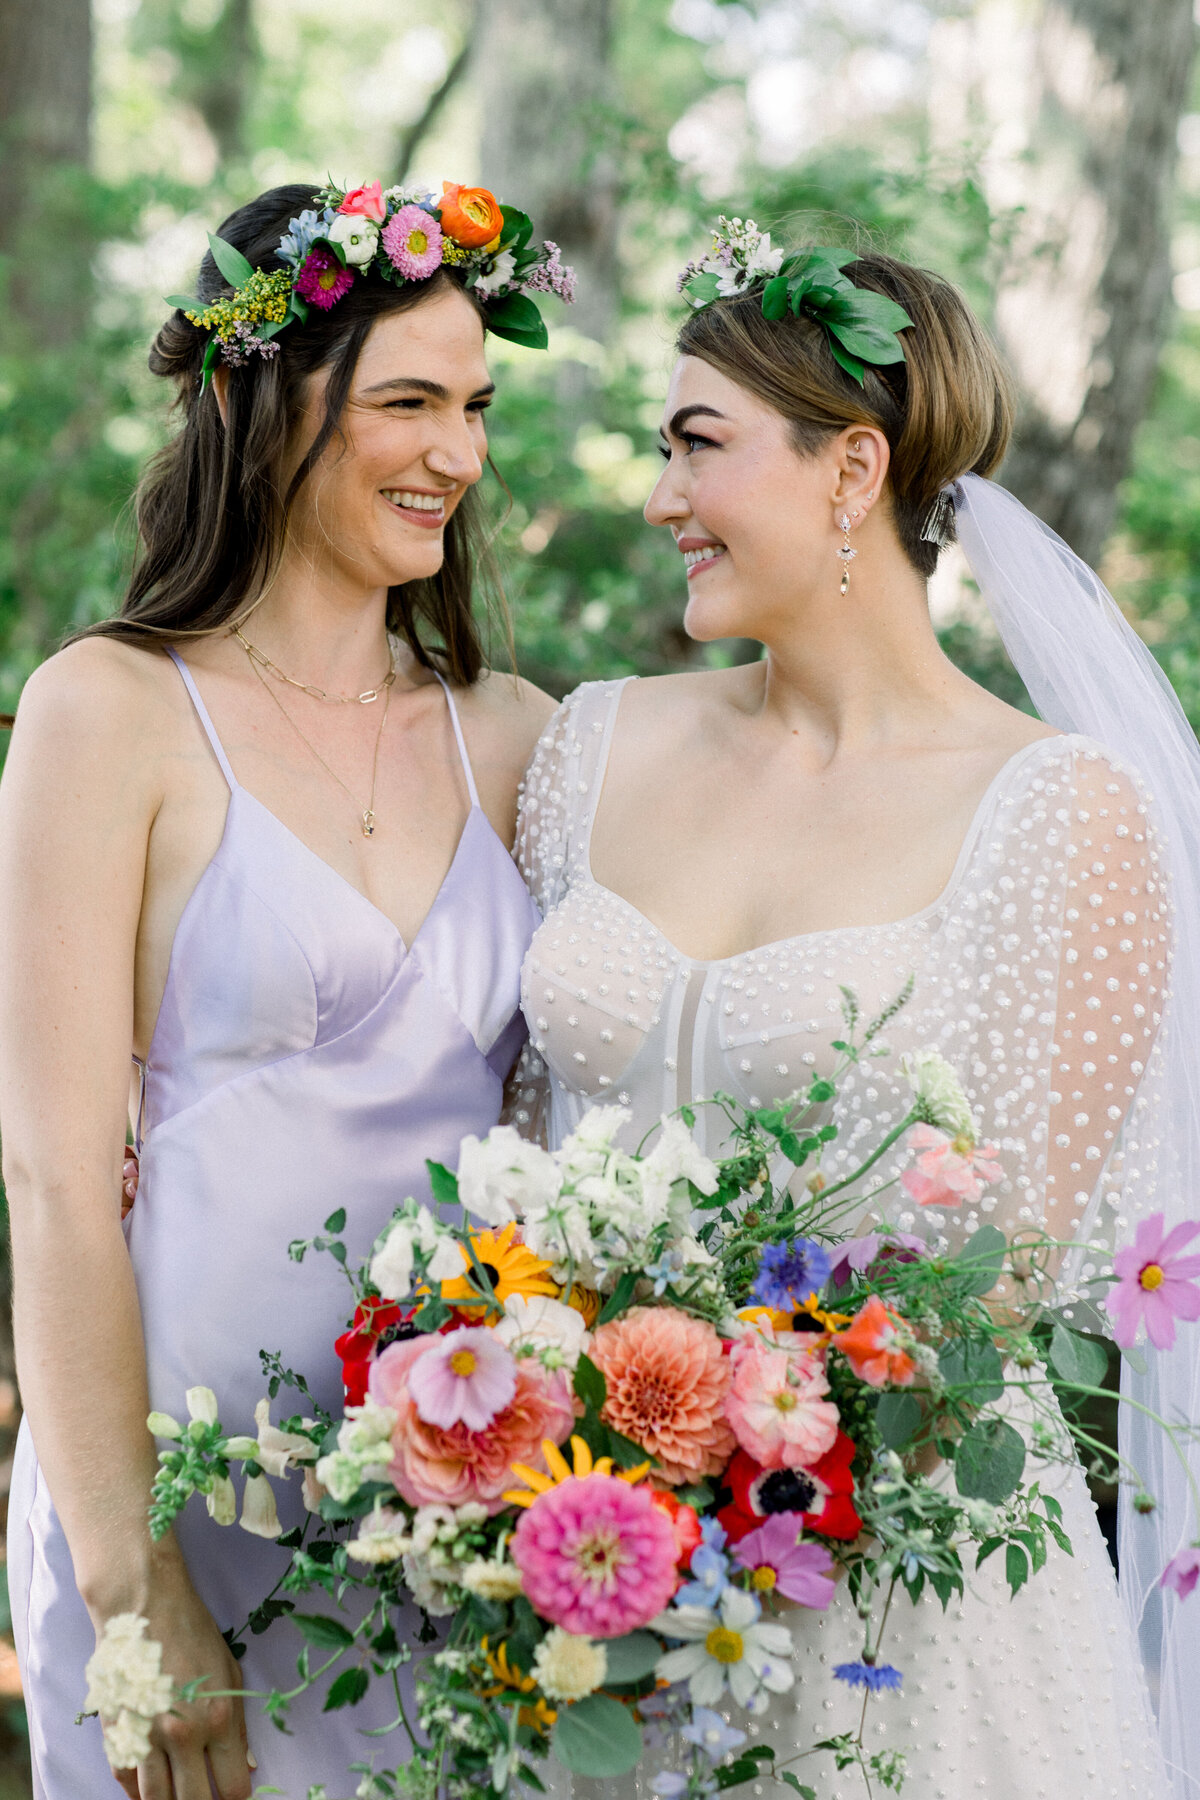 Bride with bridesmaids with colorful bouquets at New Hampshire wedding